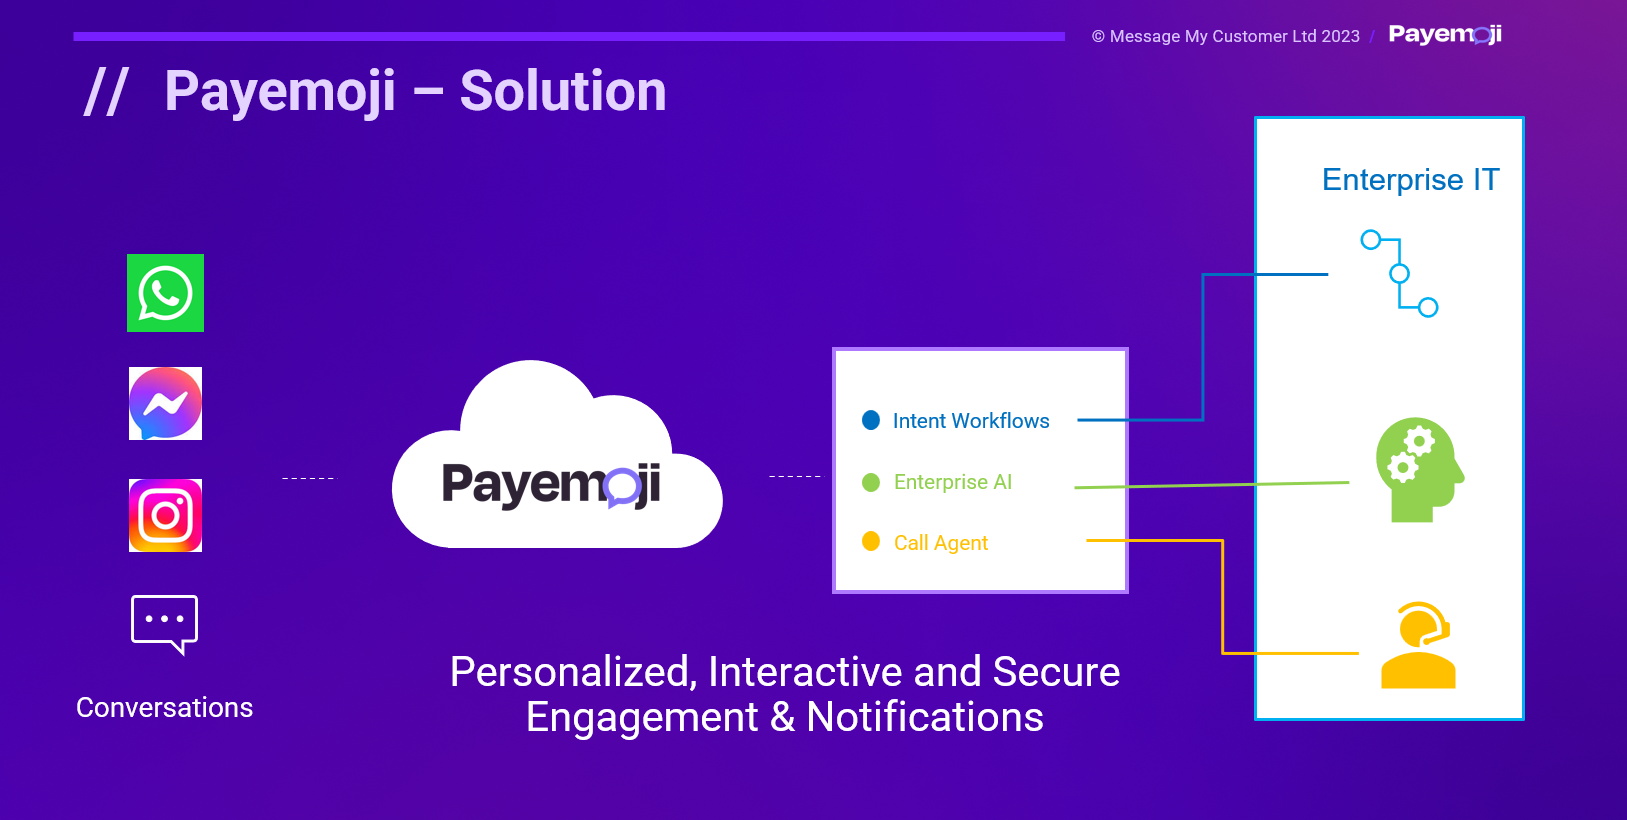 Payemoji - Solution overview